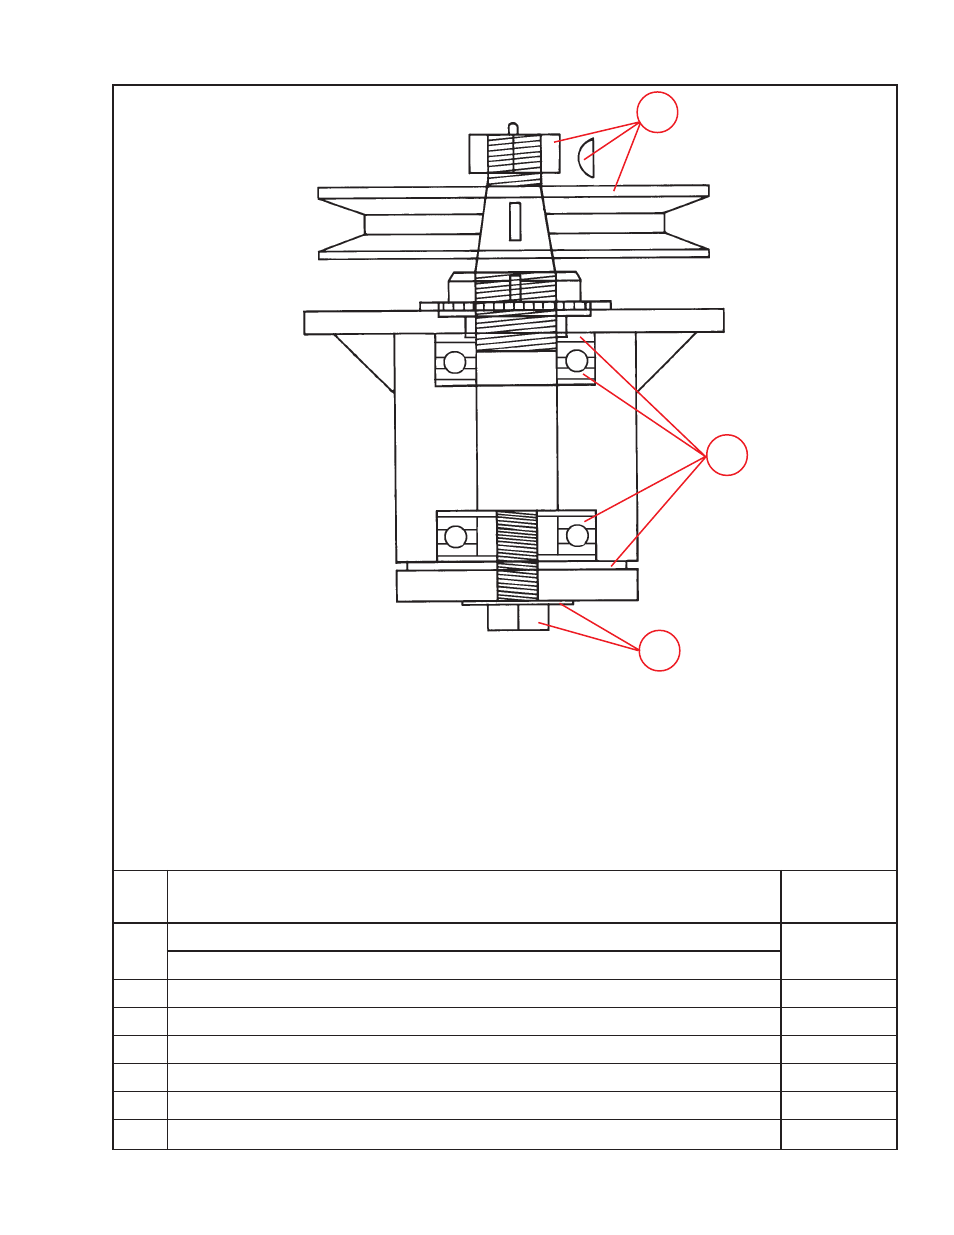 Blade spindle unit | King Kutter XB User Manual | Page 17 / 20